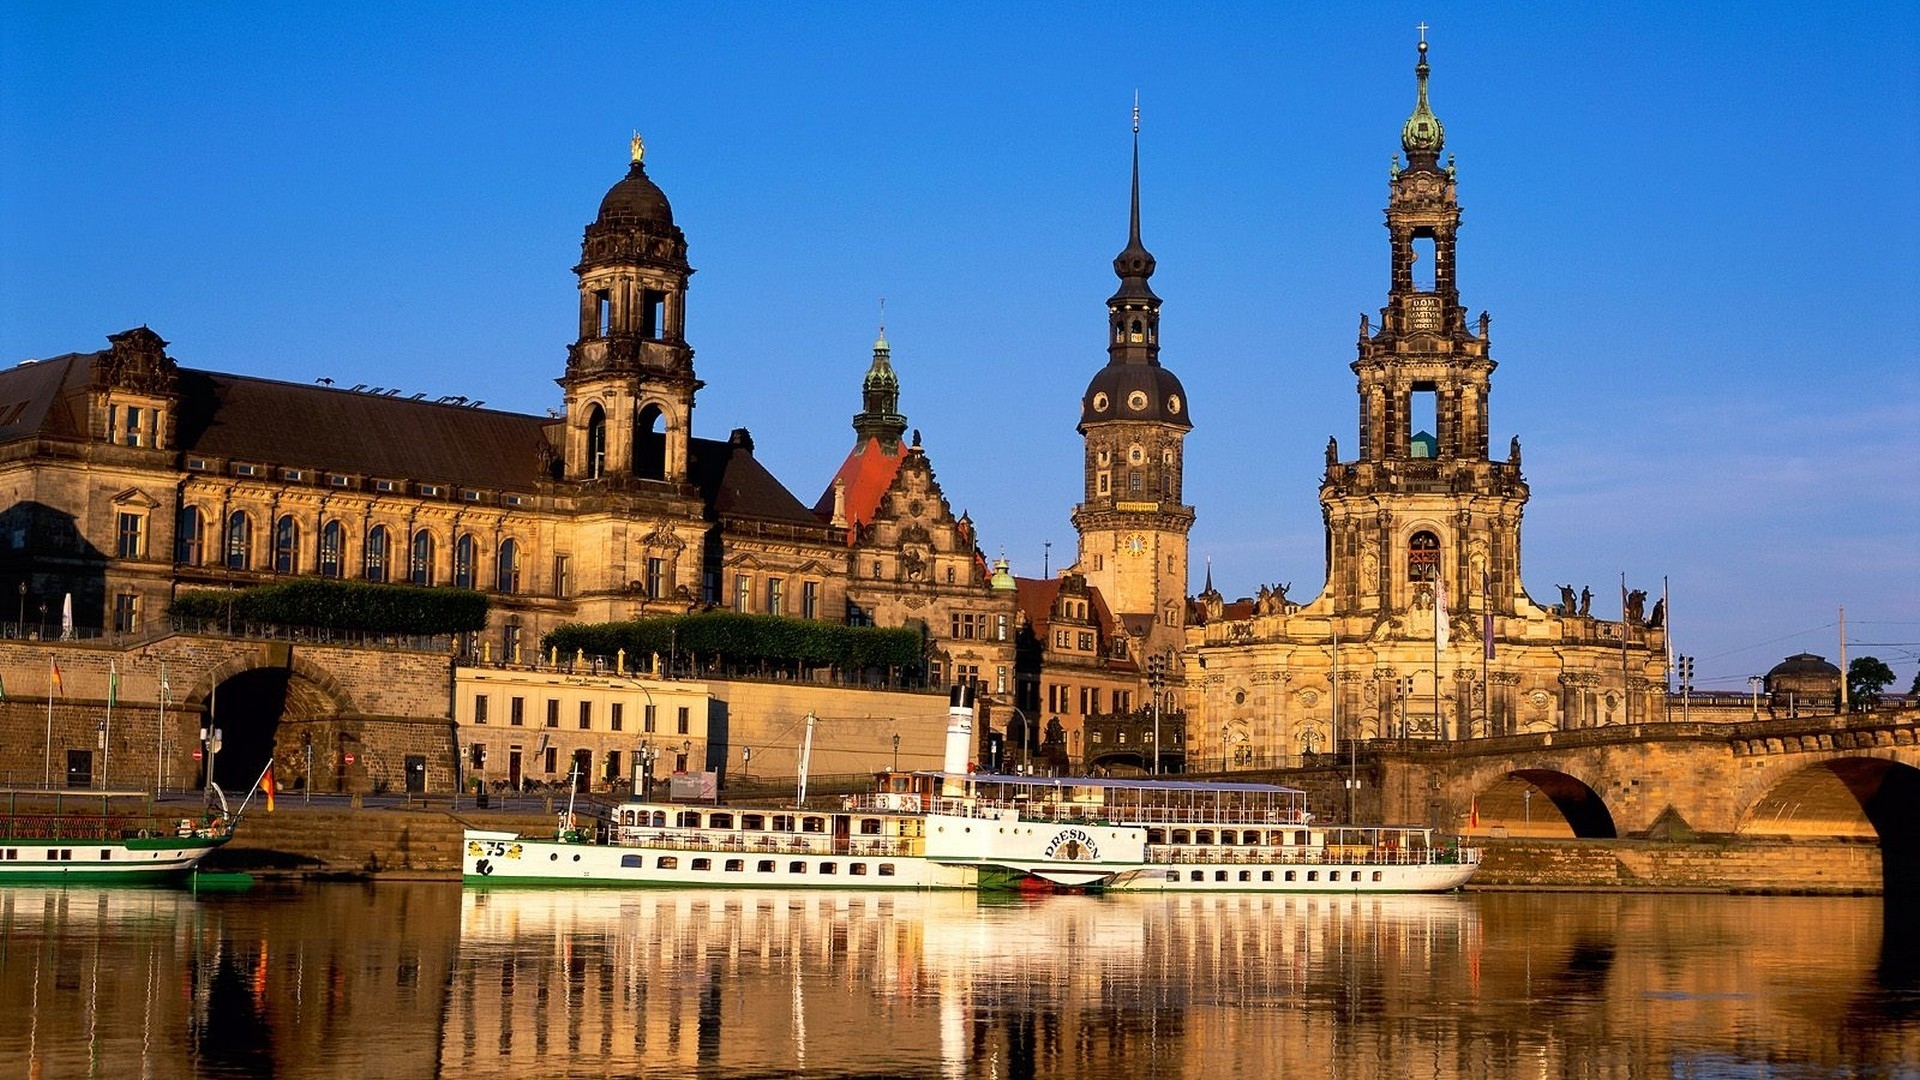 germany, Dresden, Vehicles, Boats, Ship, River, Water, Reflection, Shine, Architecture, Buildings, Hdr, Photography Wallpaper